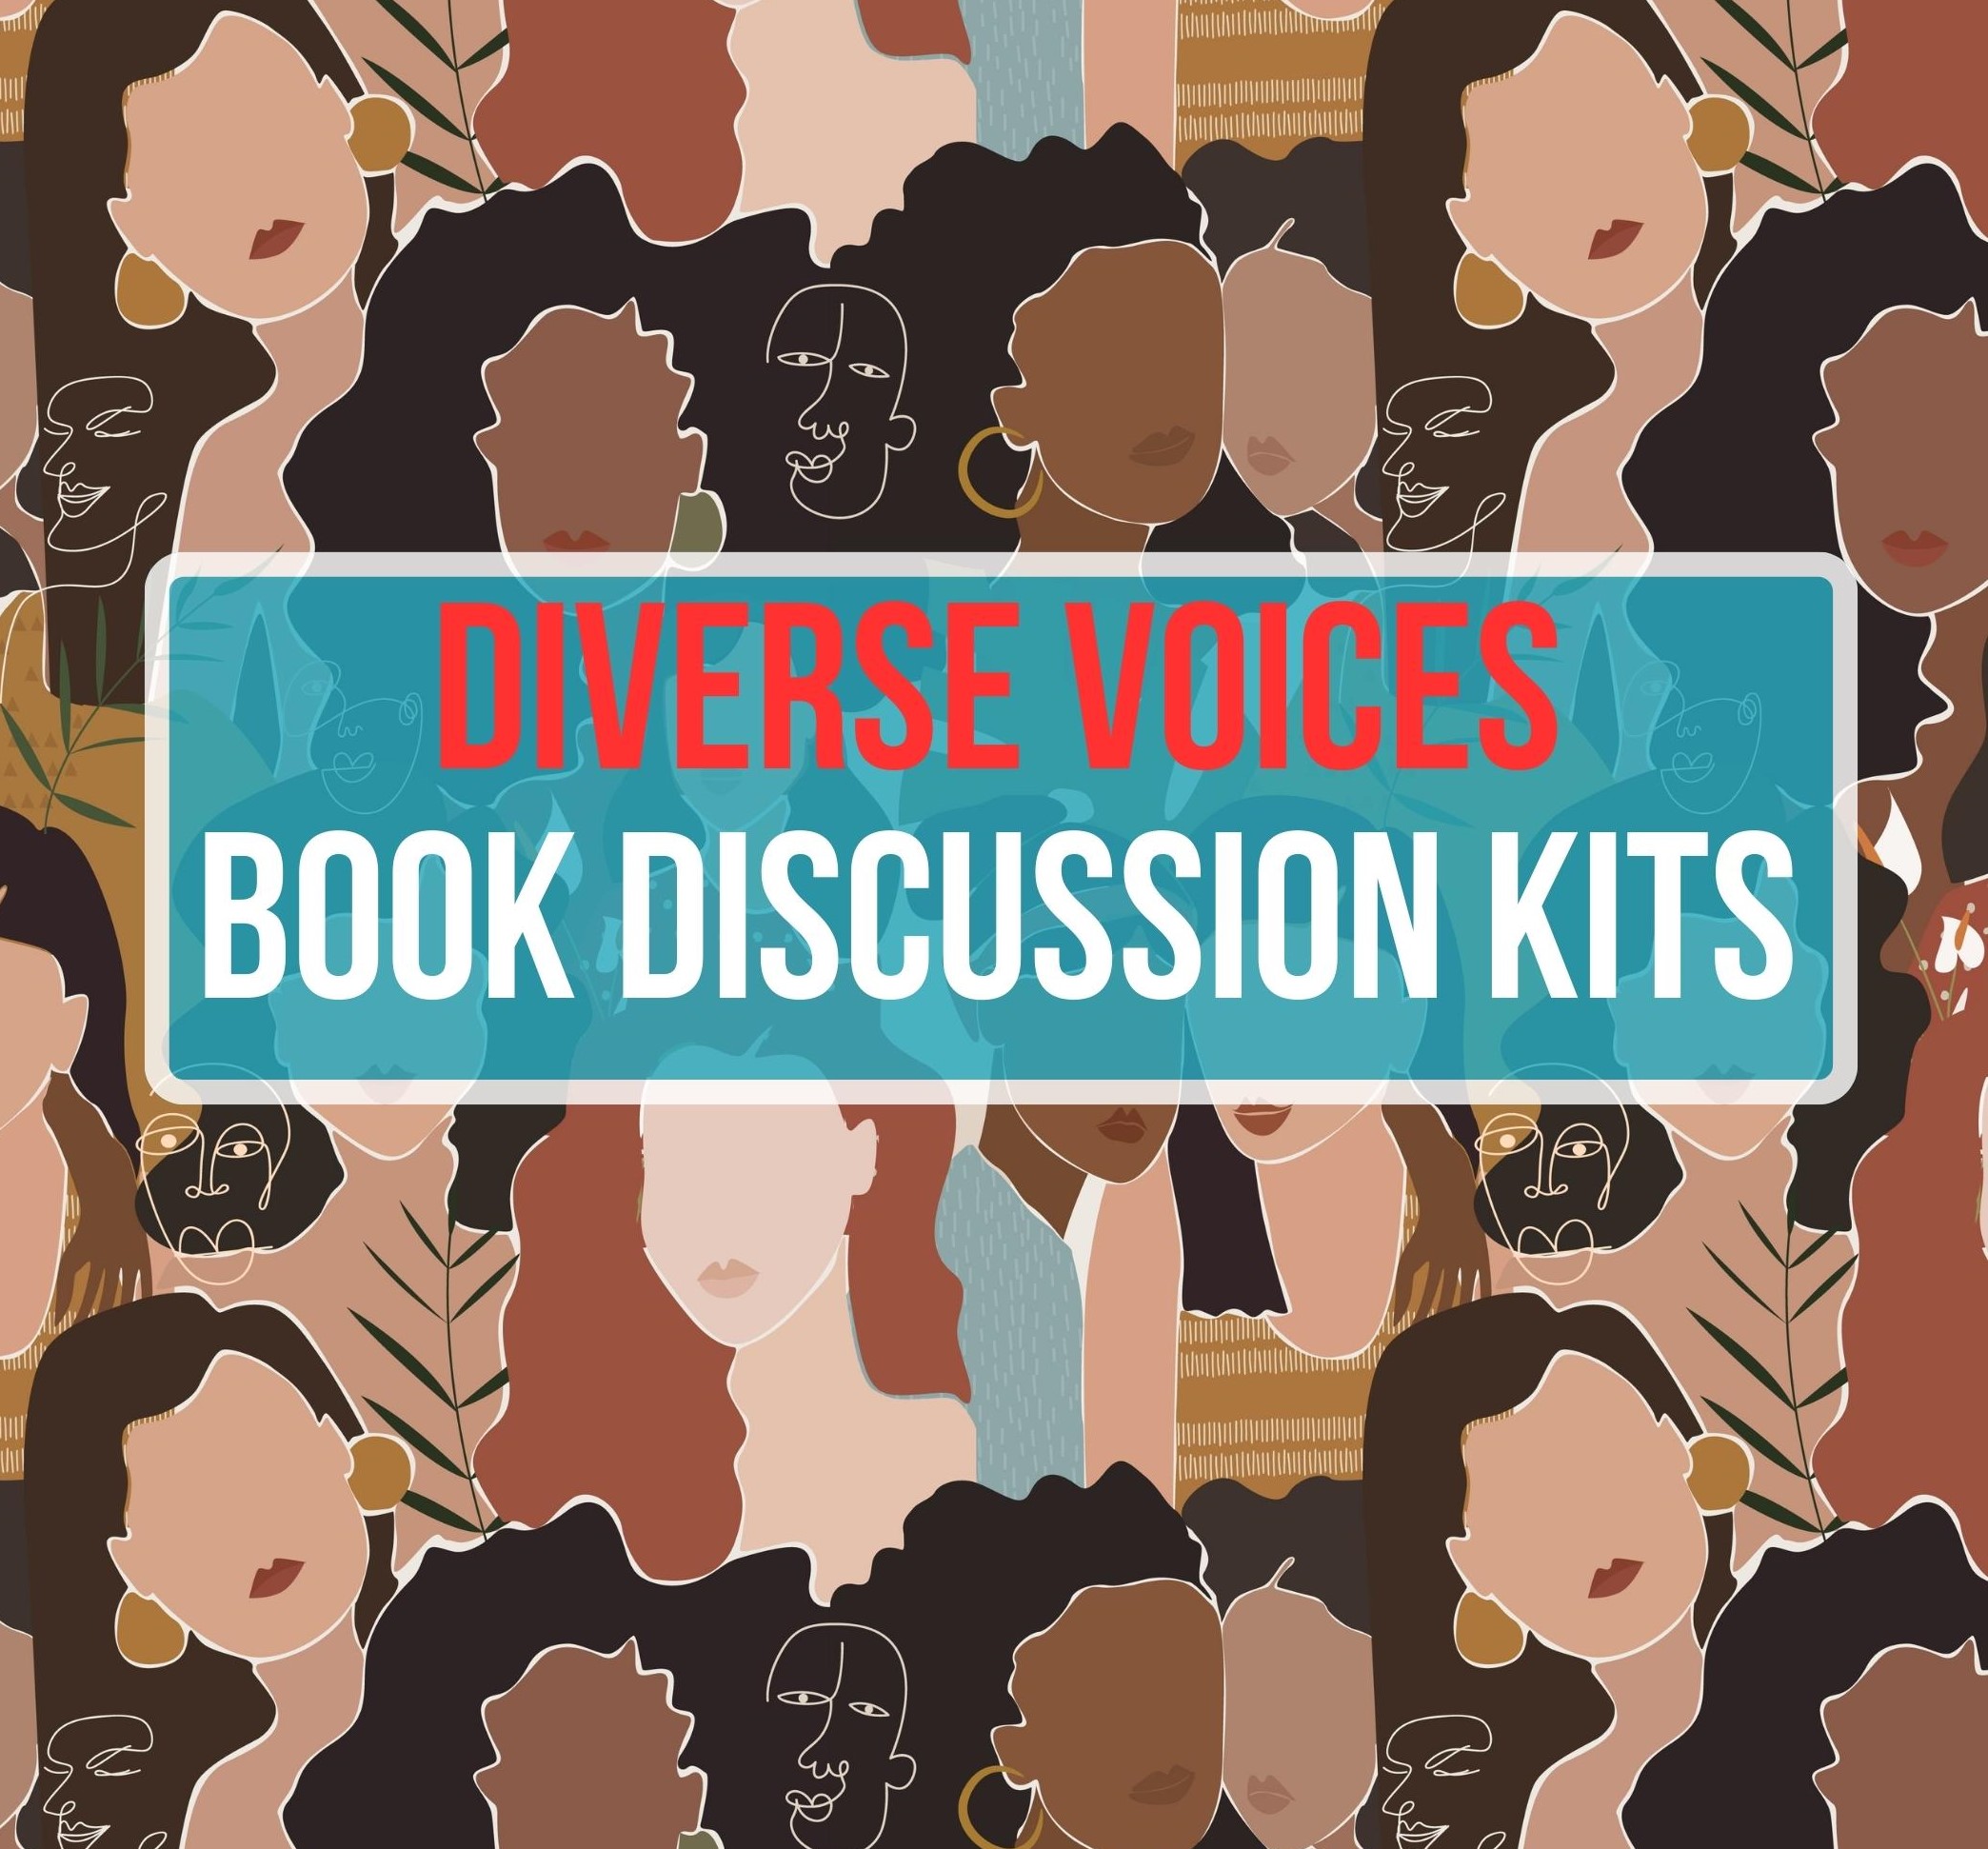 graphic of many faces of many colors overlayed with the text "Diverse Voices Book Discussion Kits."